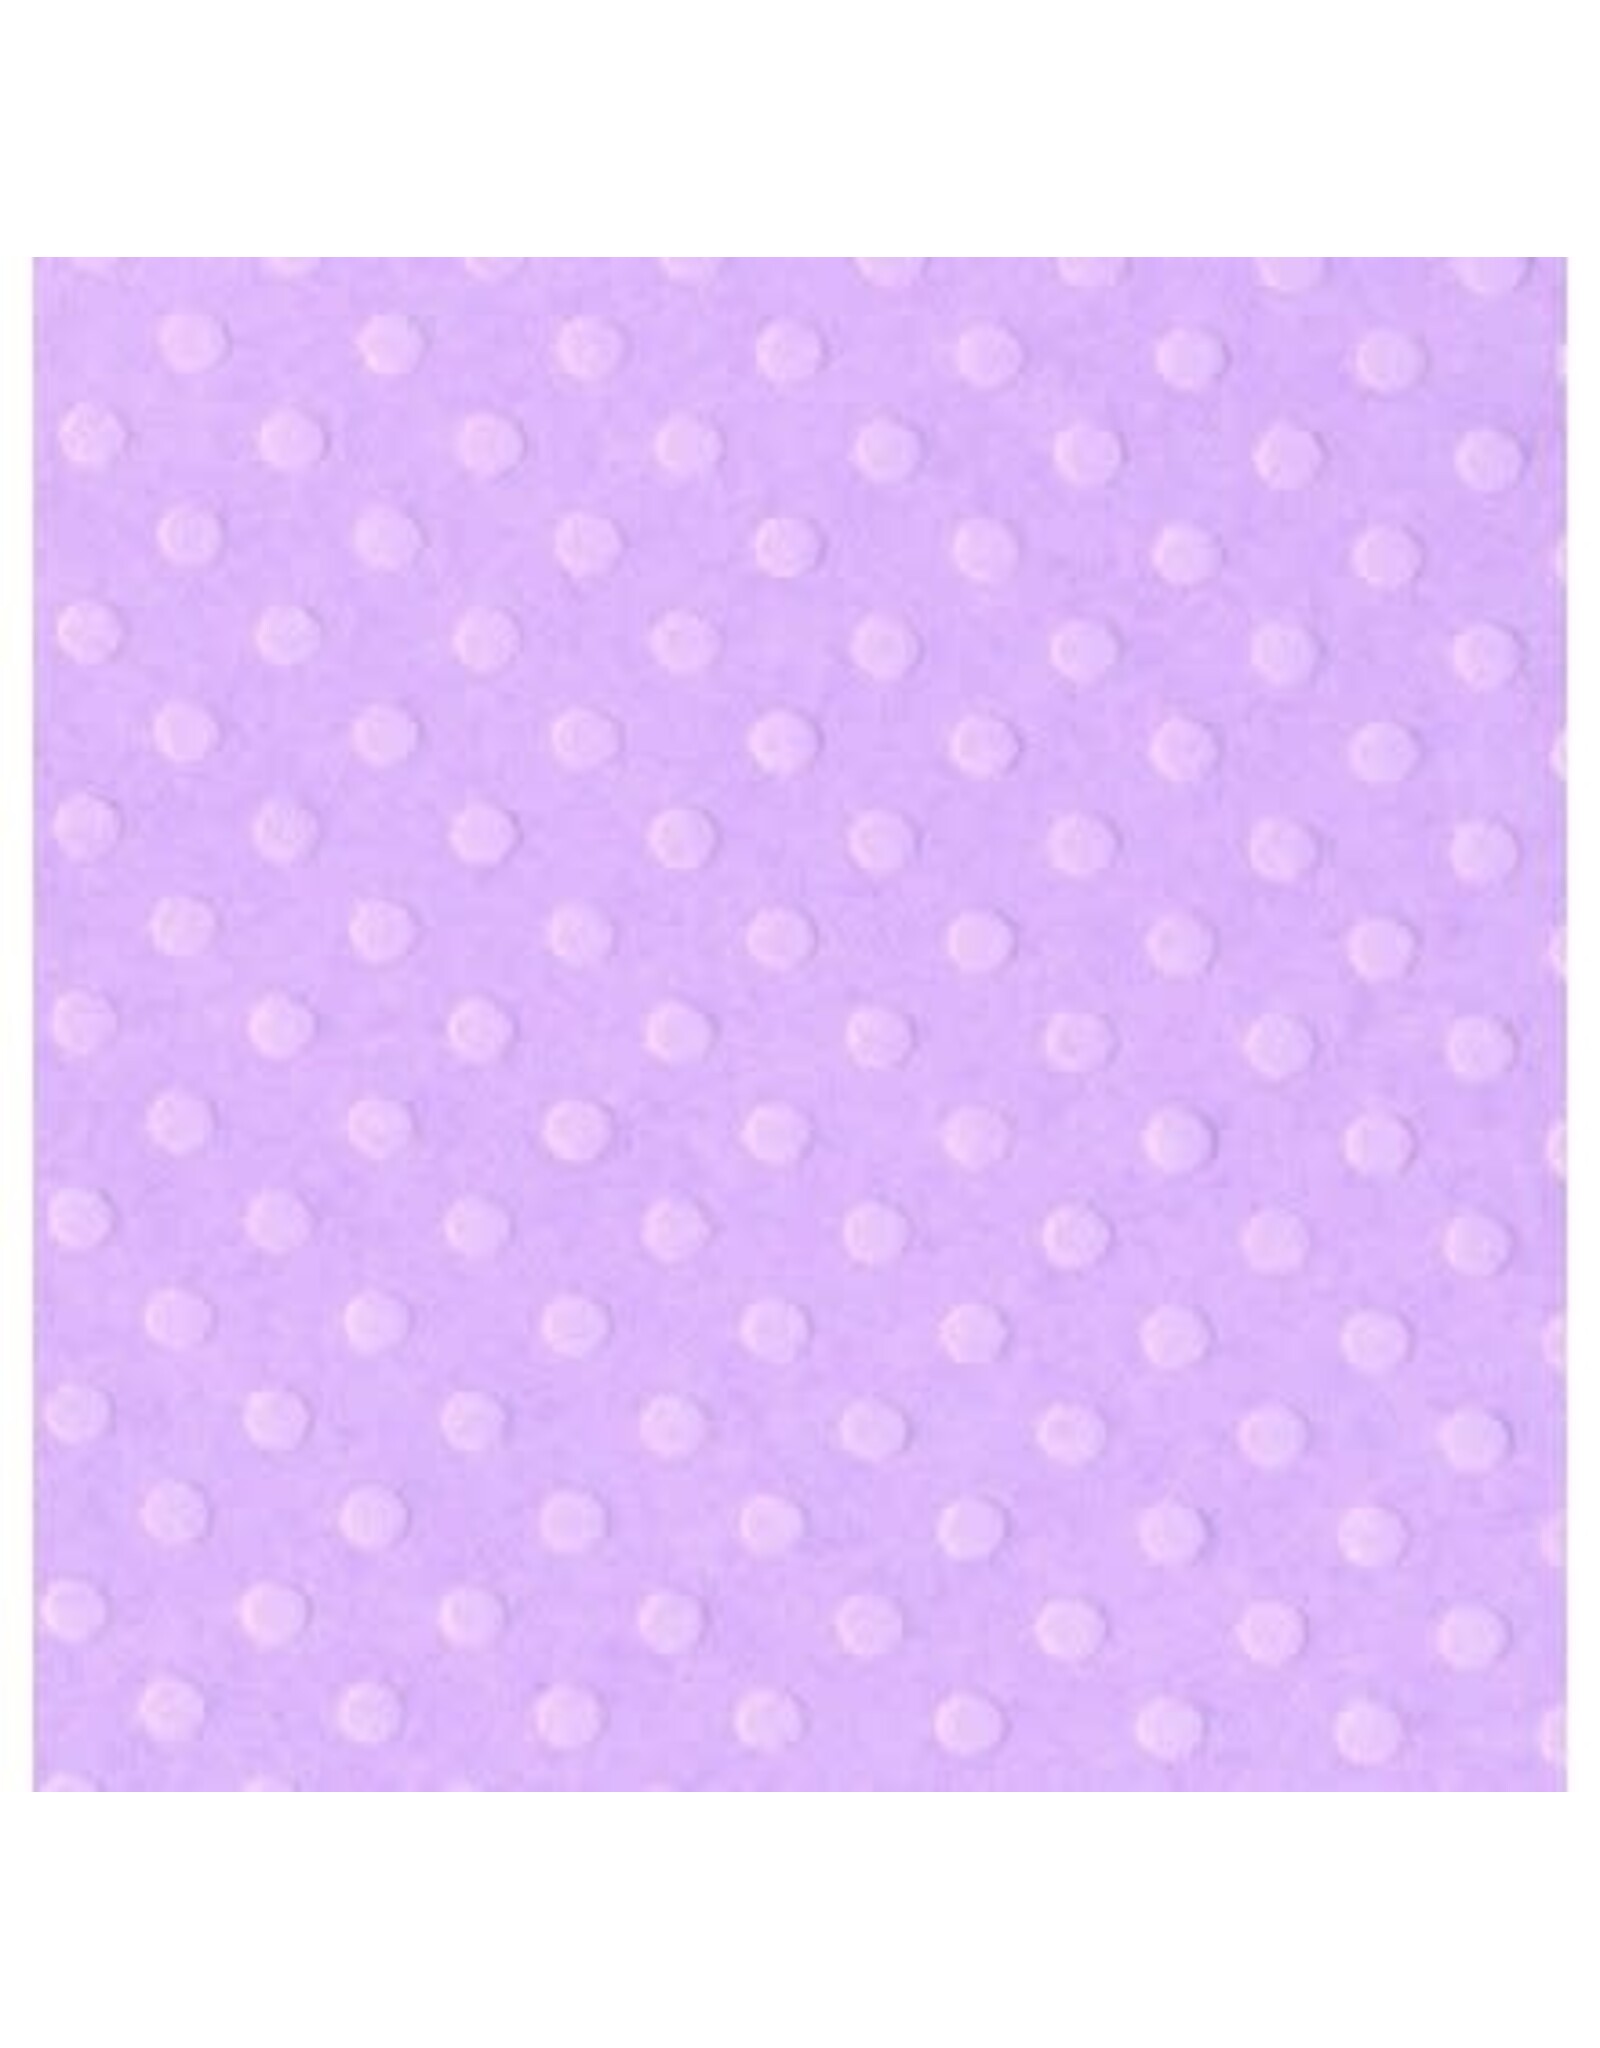 BAZZILL BAZZILL DOTTED SWISS BERRY PRETTY CARDSTOCK 12X12